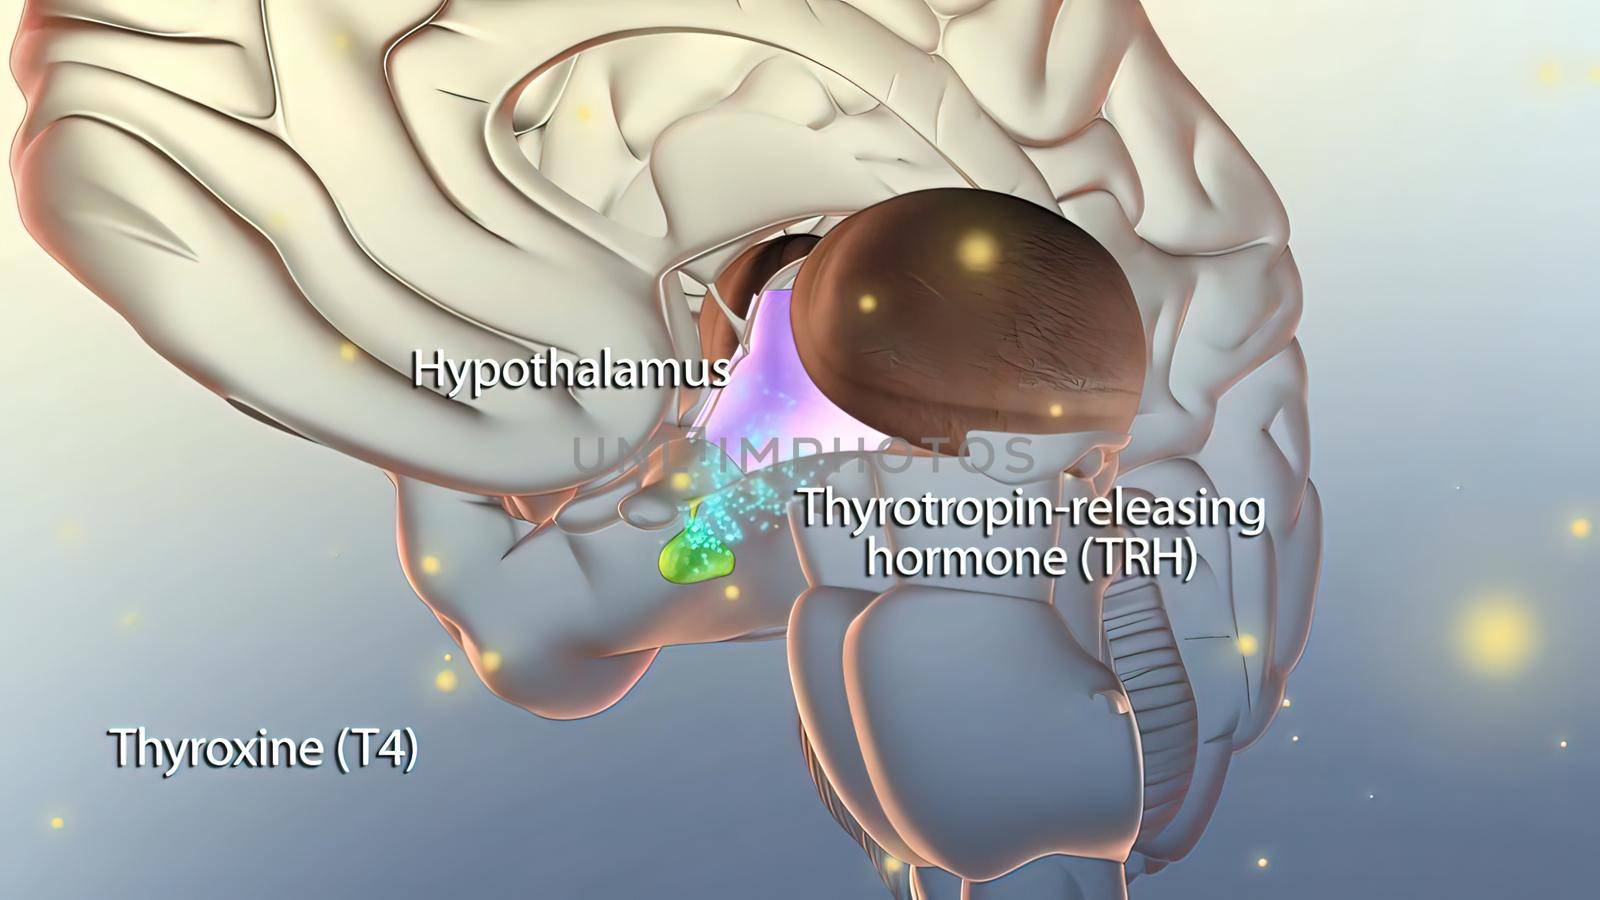 Hormone release in the brain by creativepic